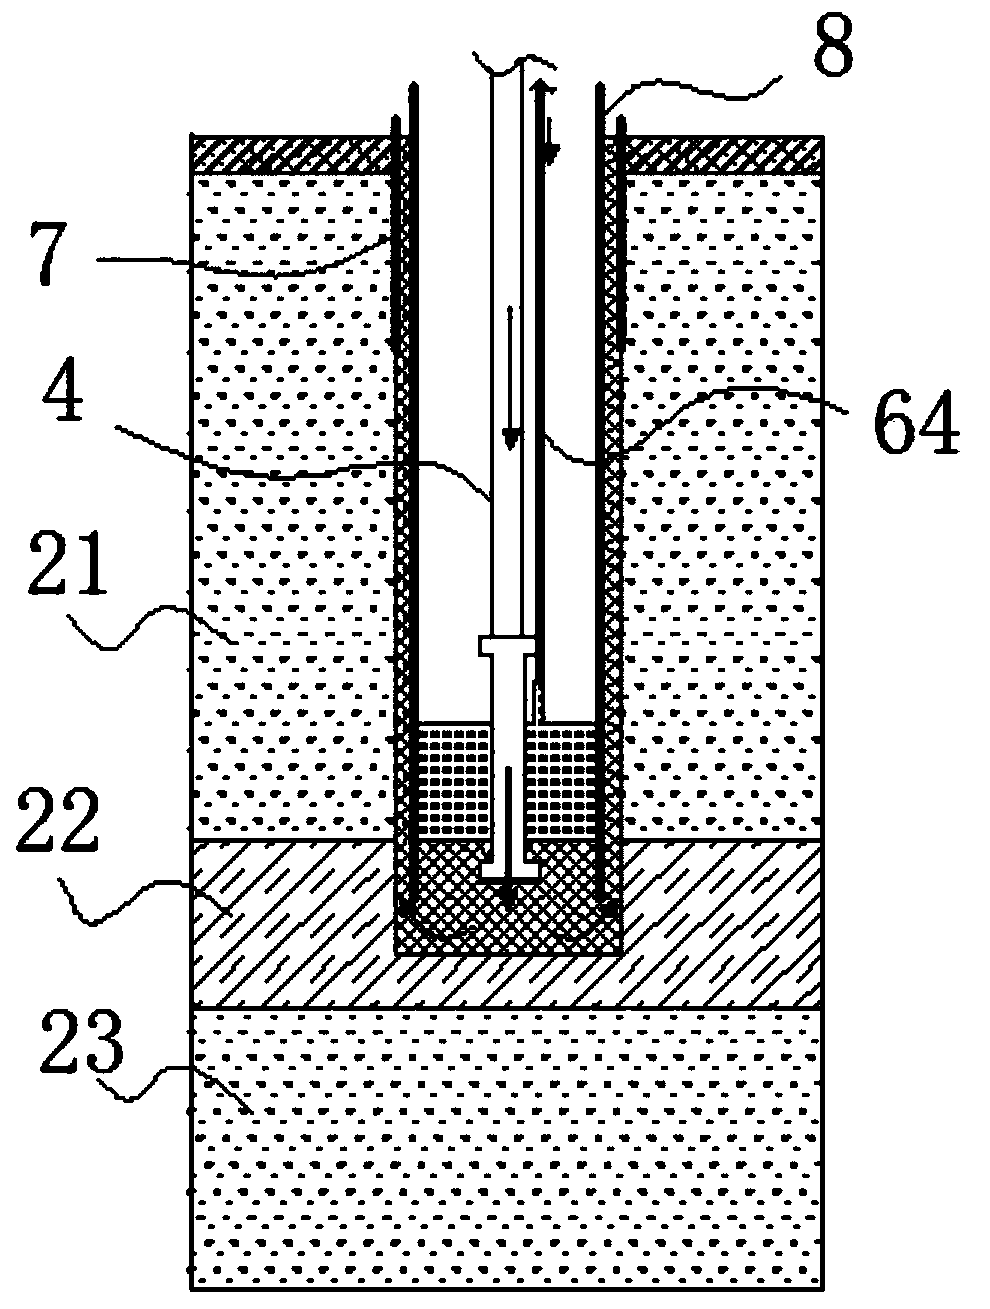 Drilling water stop device and water stop method